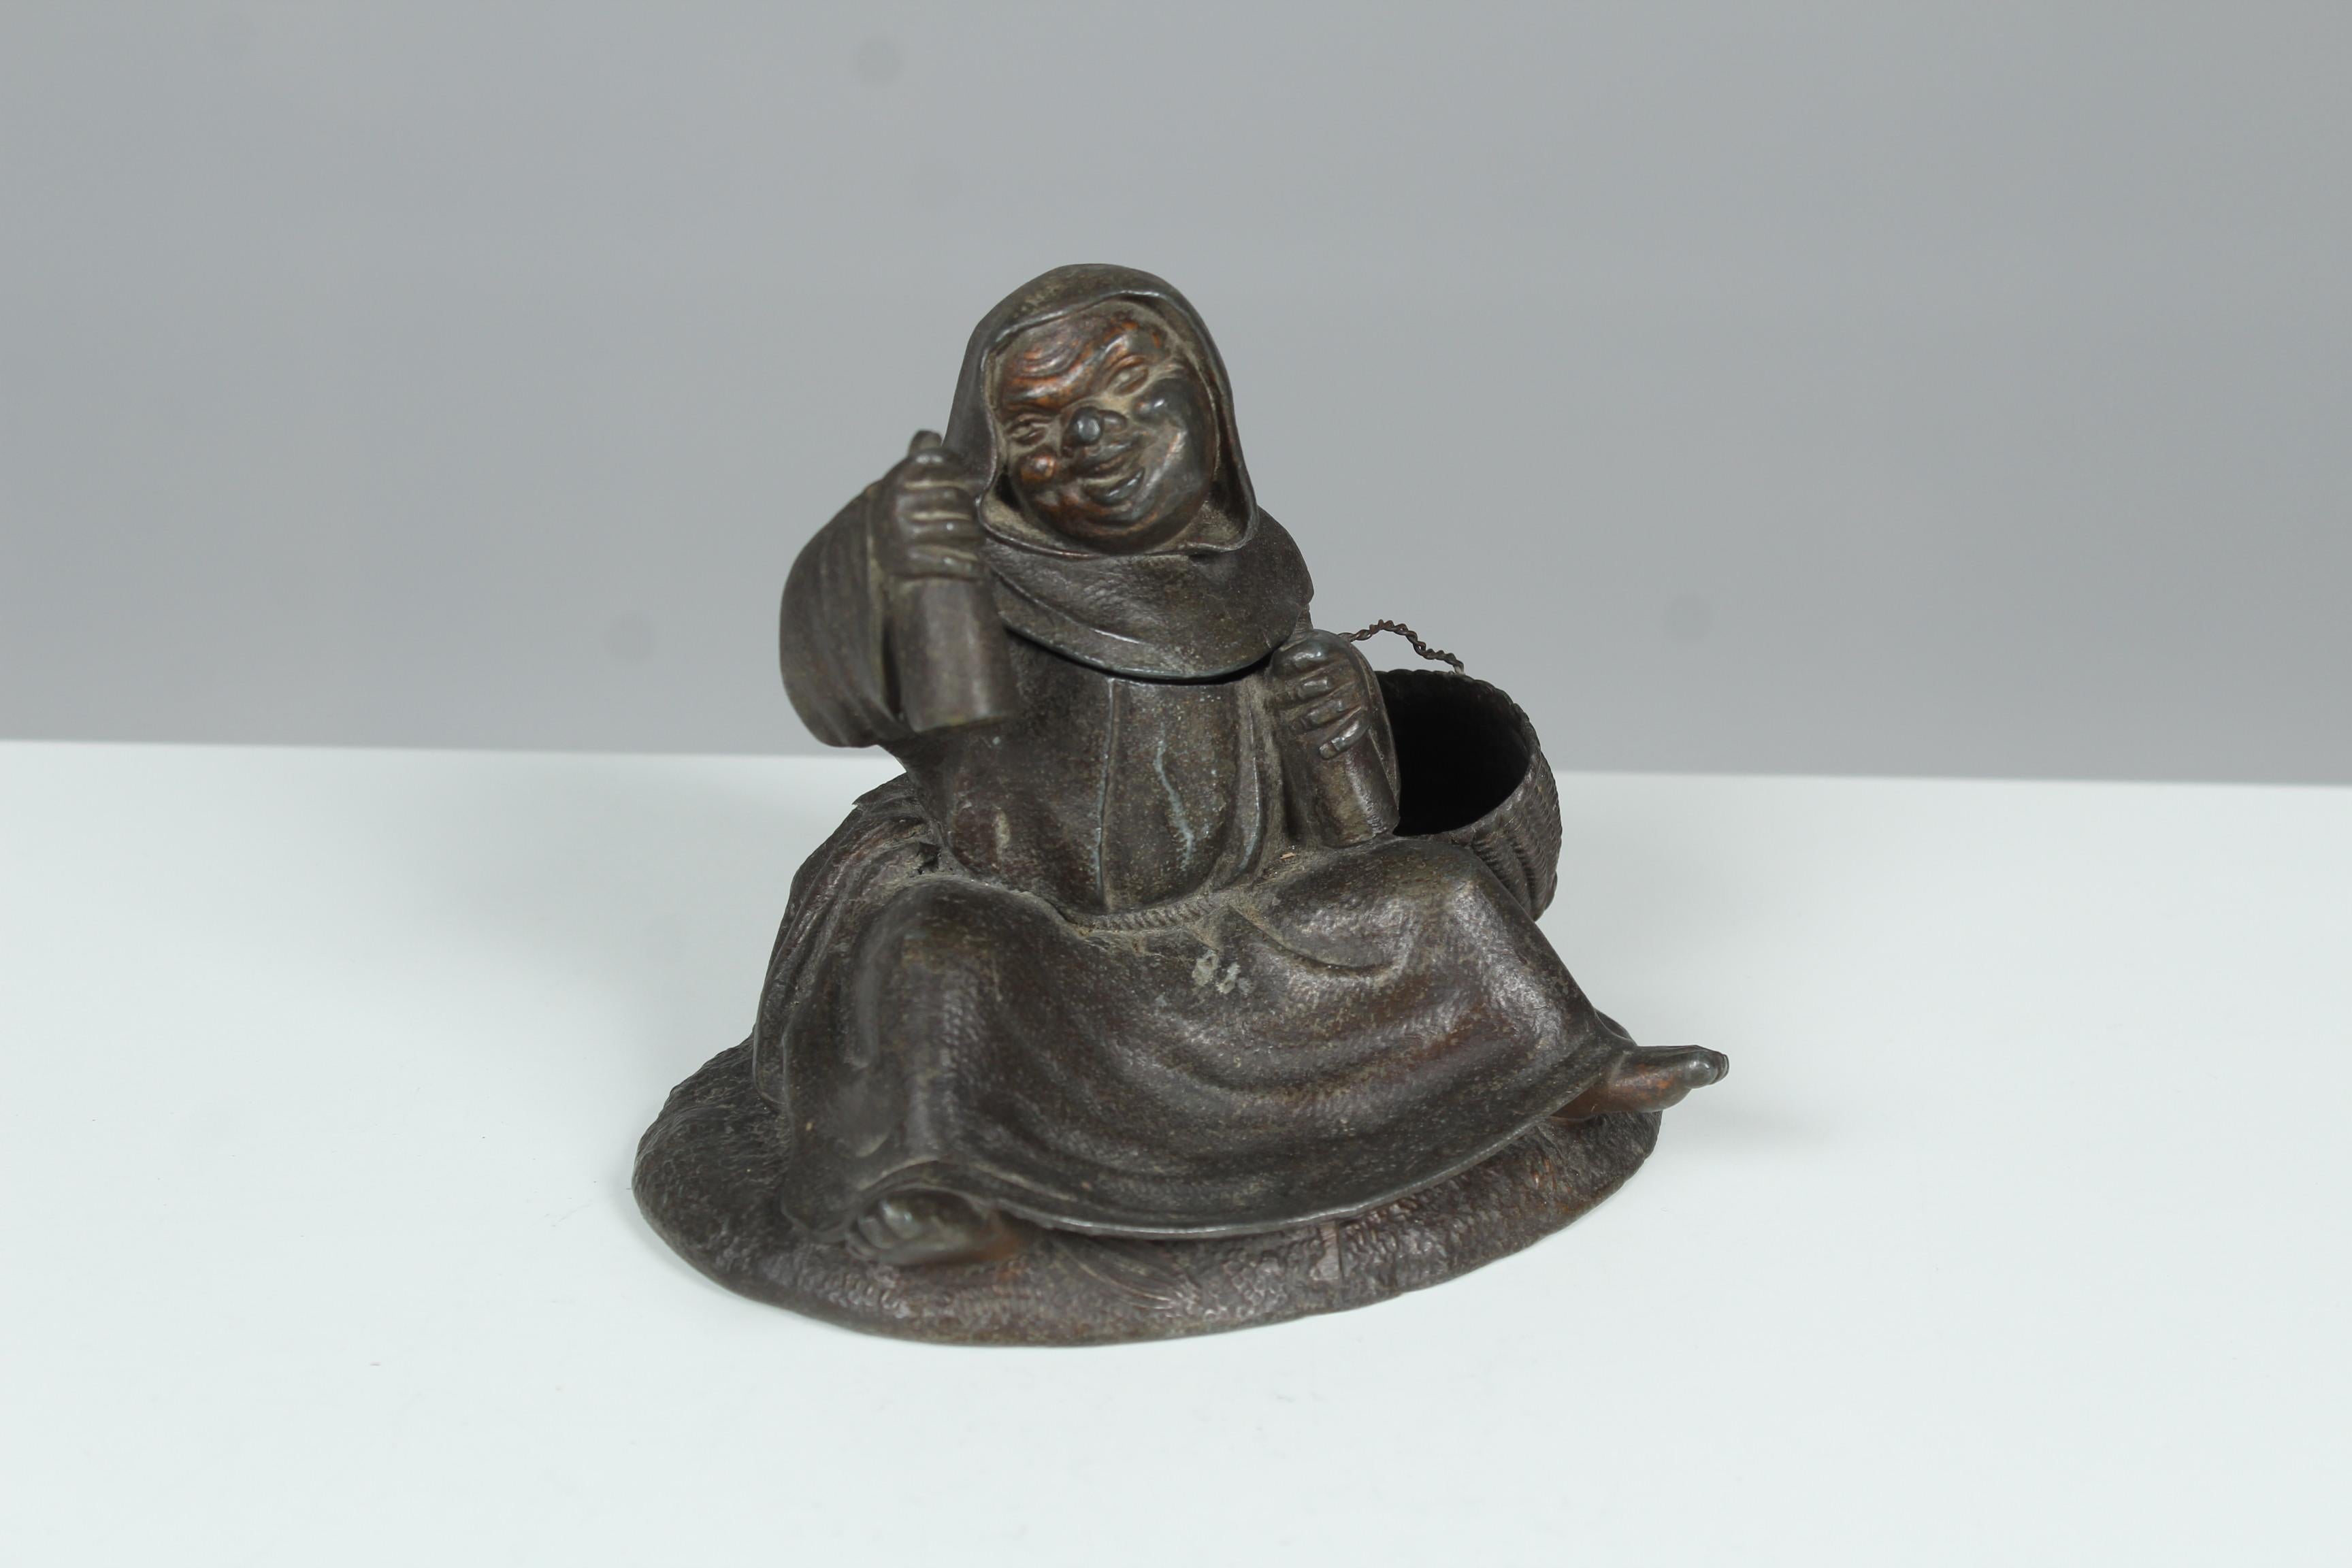 Rare sculpture of a joyful monk with a secret compartment.
A so called Pyrogene, which was used for smoking utensils, such as matches.
The monk holds two bottles in his hands and raises one arm, ready to toast the bottle.
The monk's head can be